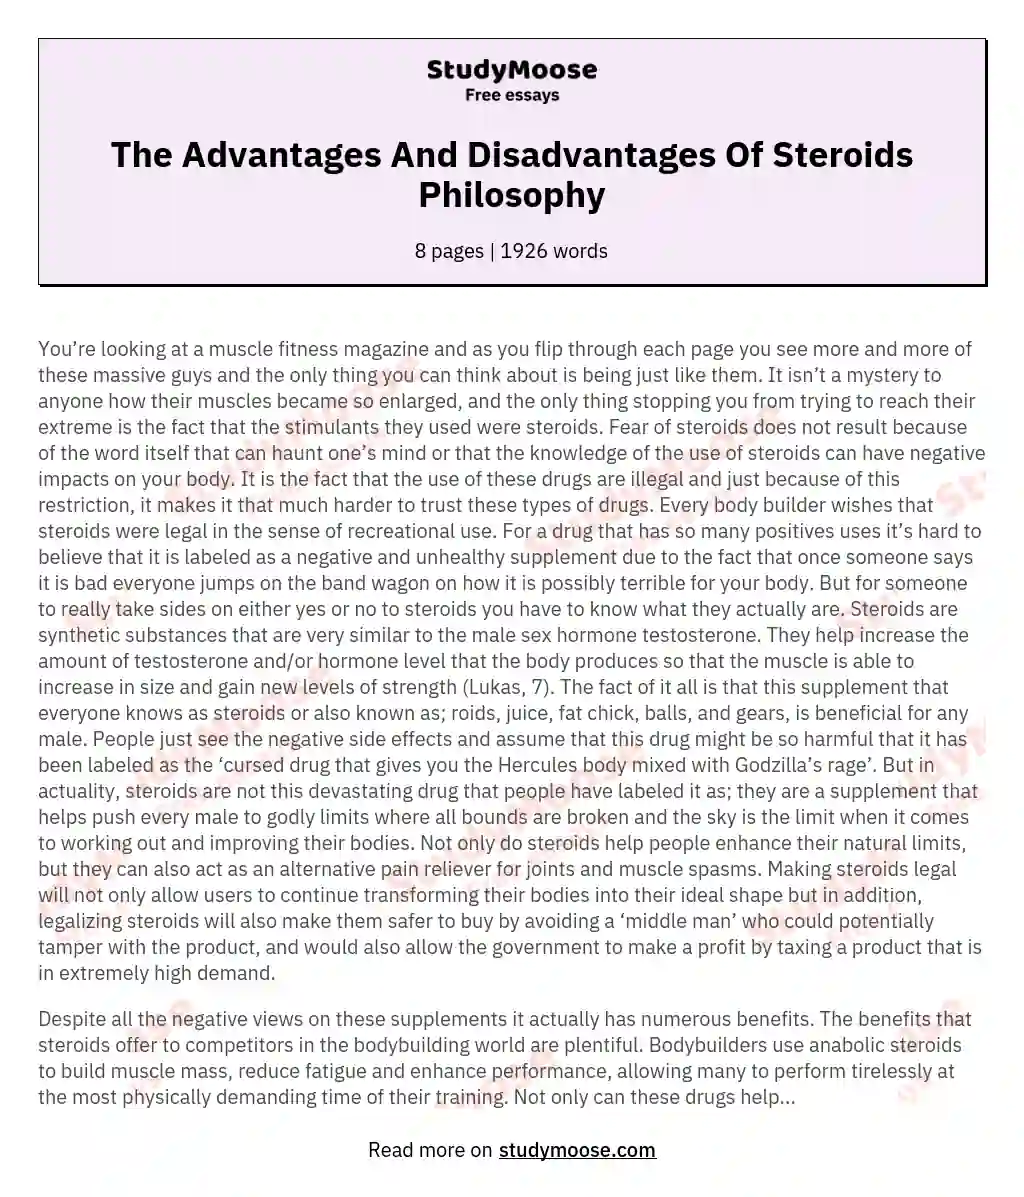 The Advantages And Disadvantages Of Steroids Philosophy essay